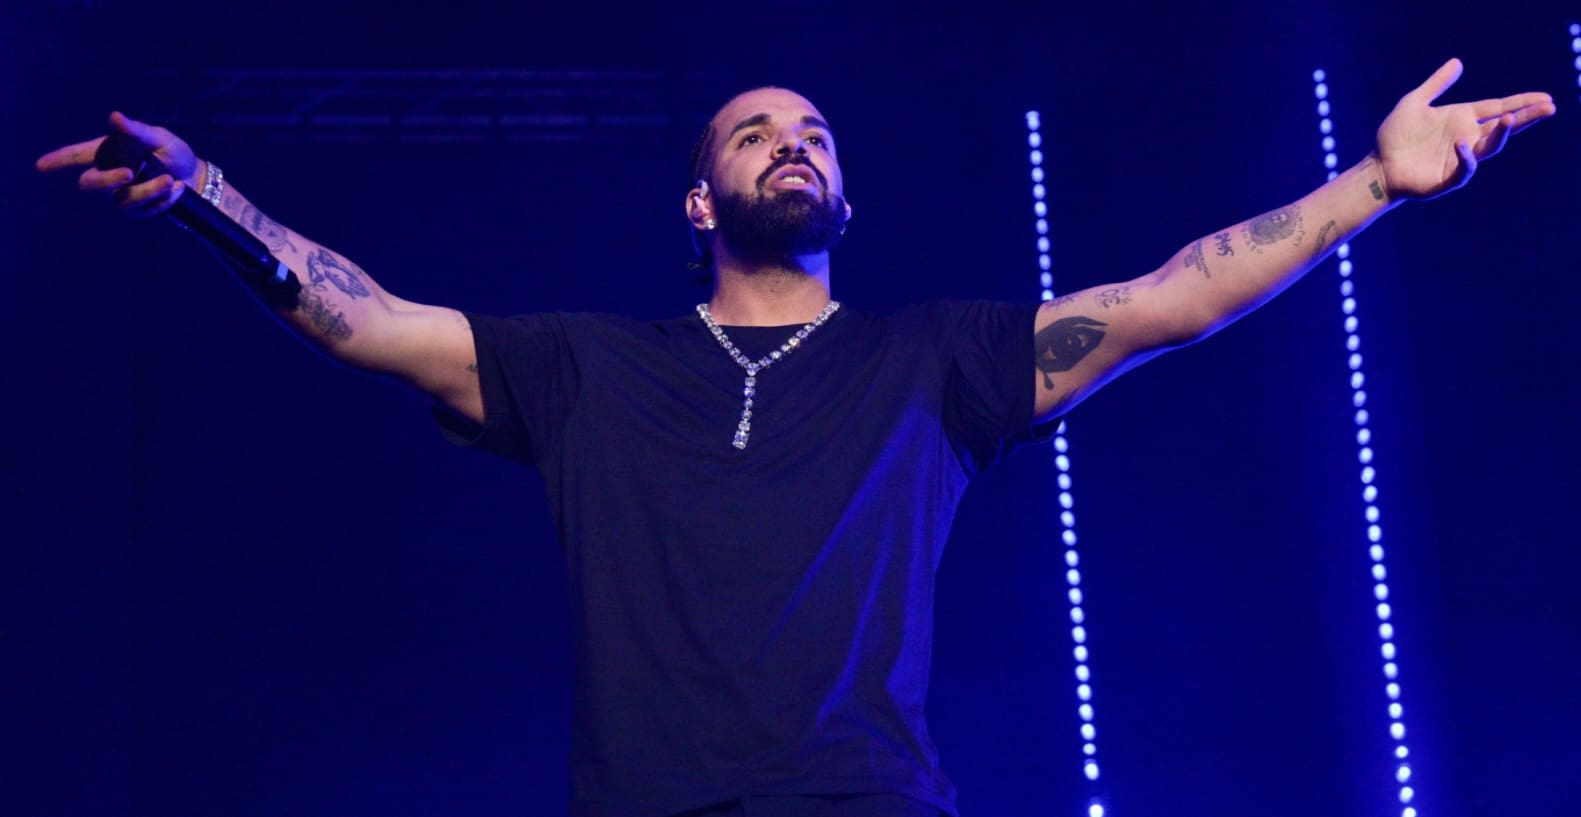 Drake Smoothly Caught A Book Thrown At Him By A Fan Onstage: ‘You Lucky I’m Quick’ [Video]